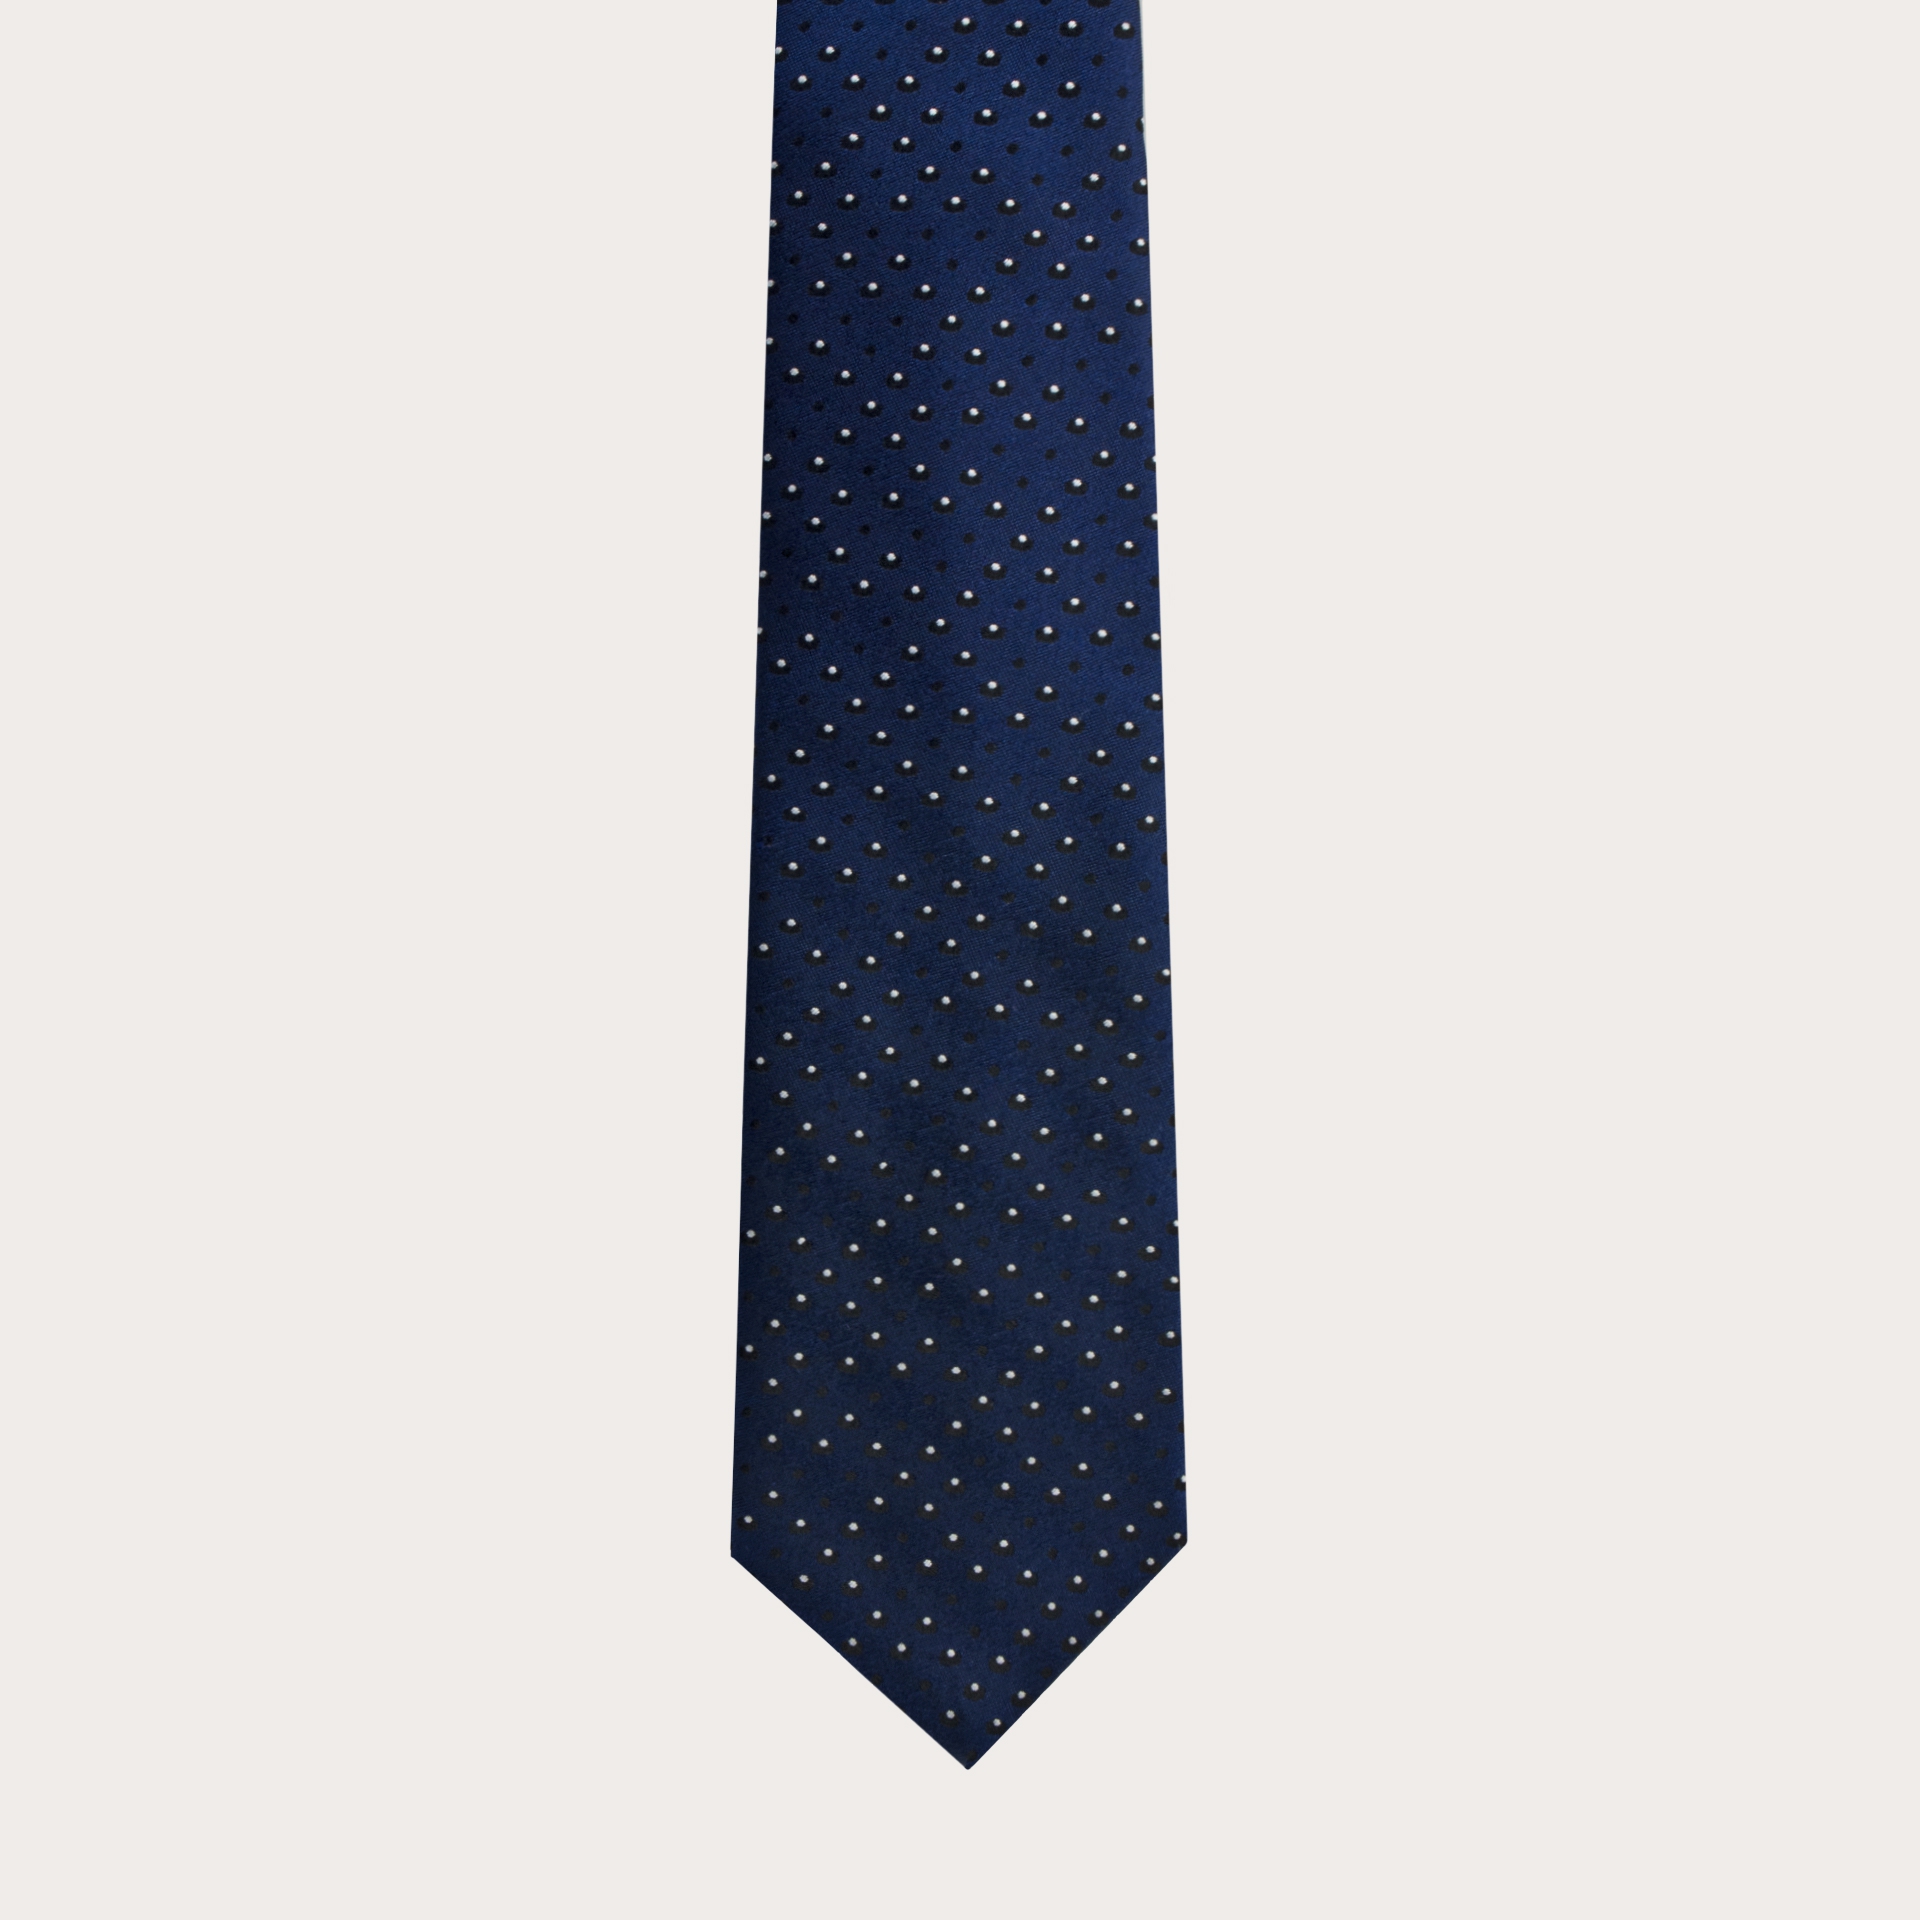 Jacquard silk tie faux dotted blue